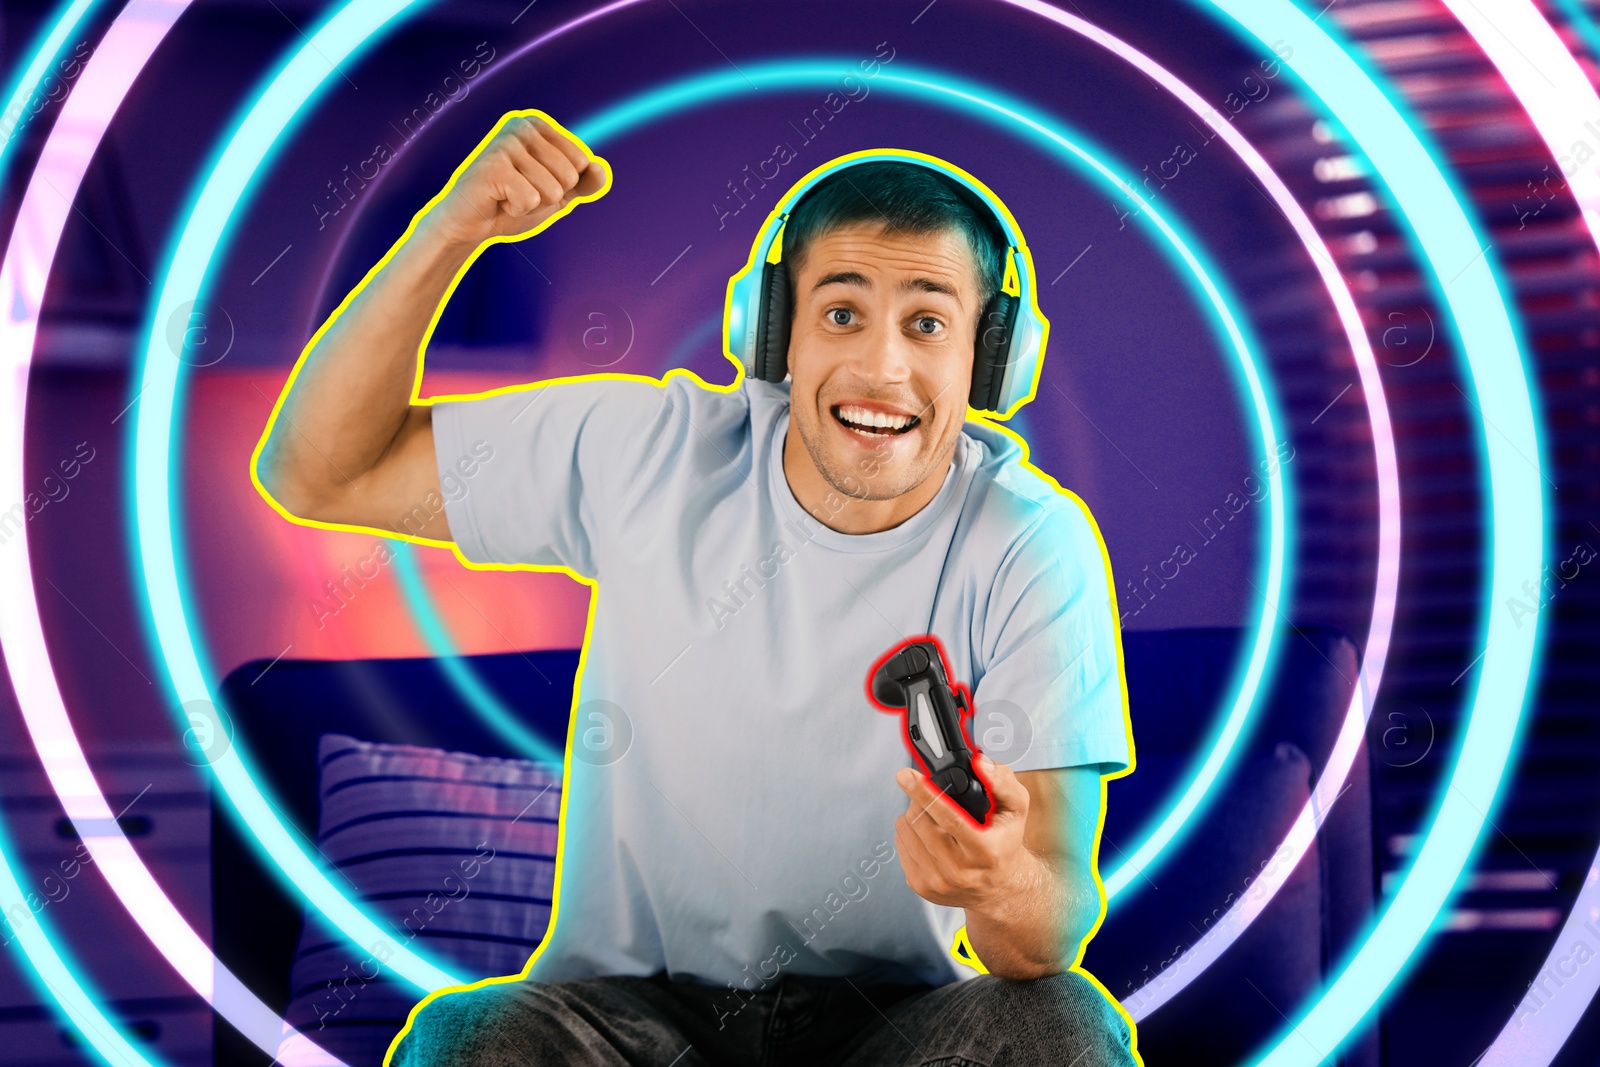 Image of Happy man playing video game with controller indoors. Colorful spiral around him